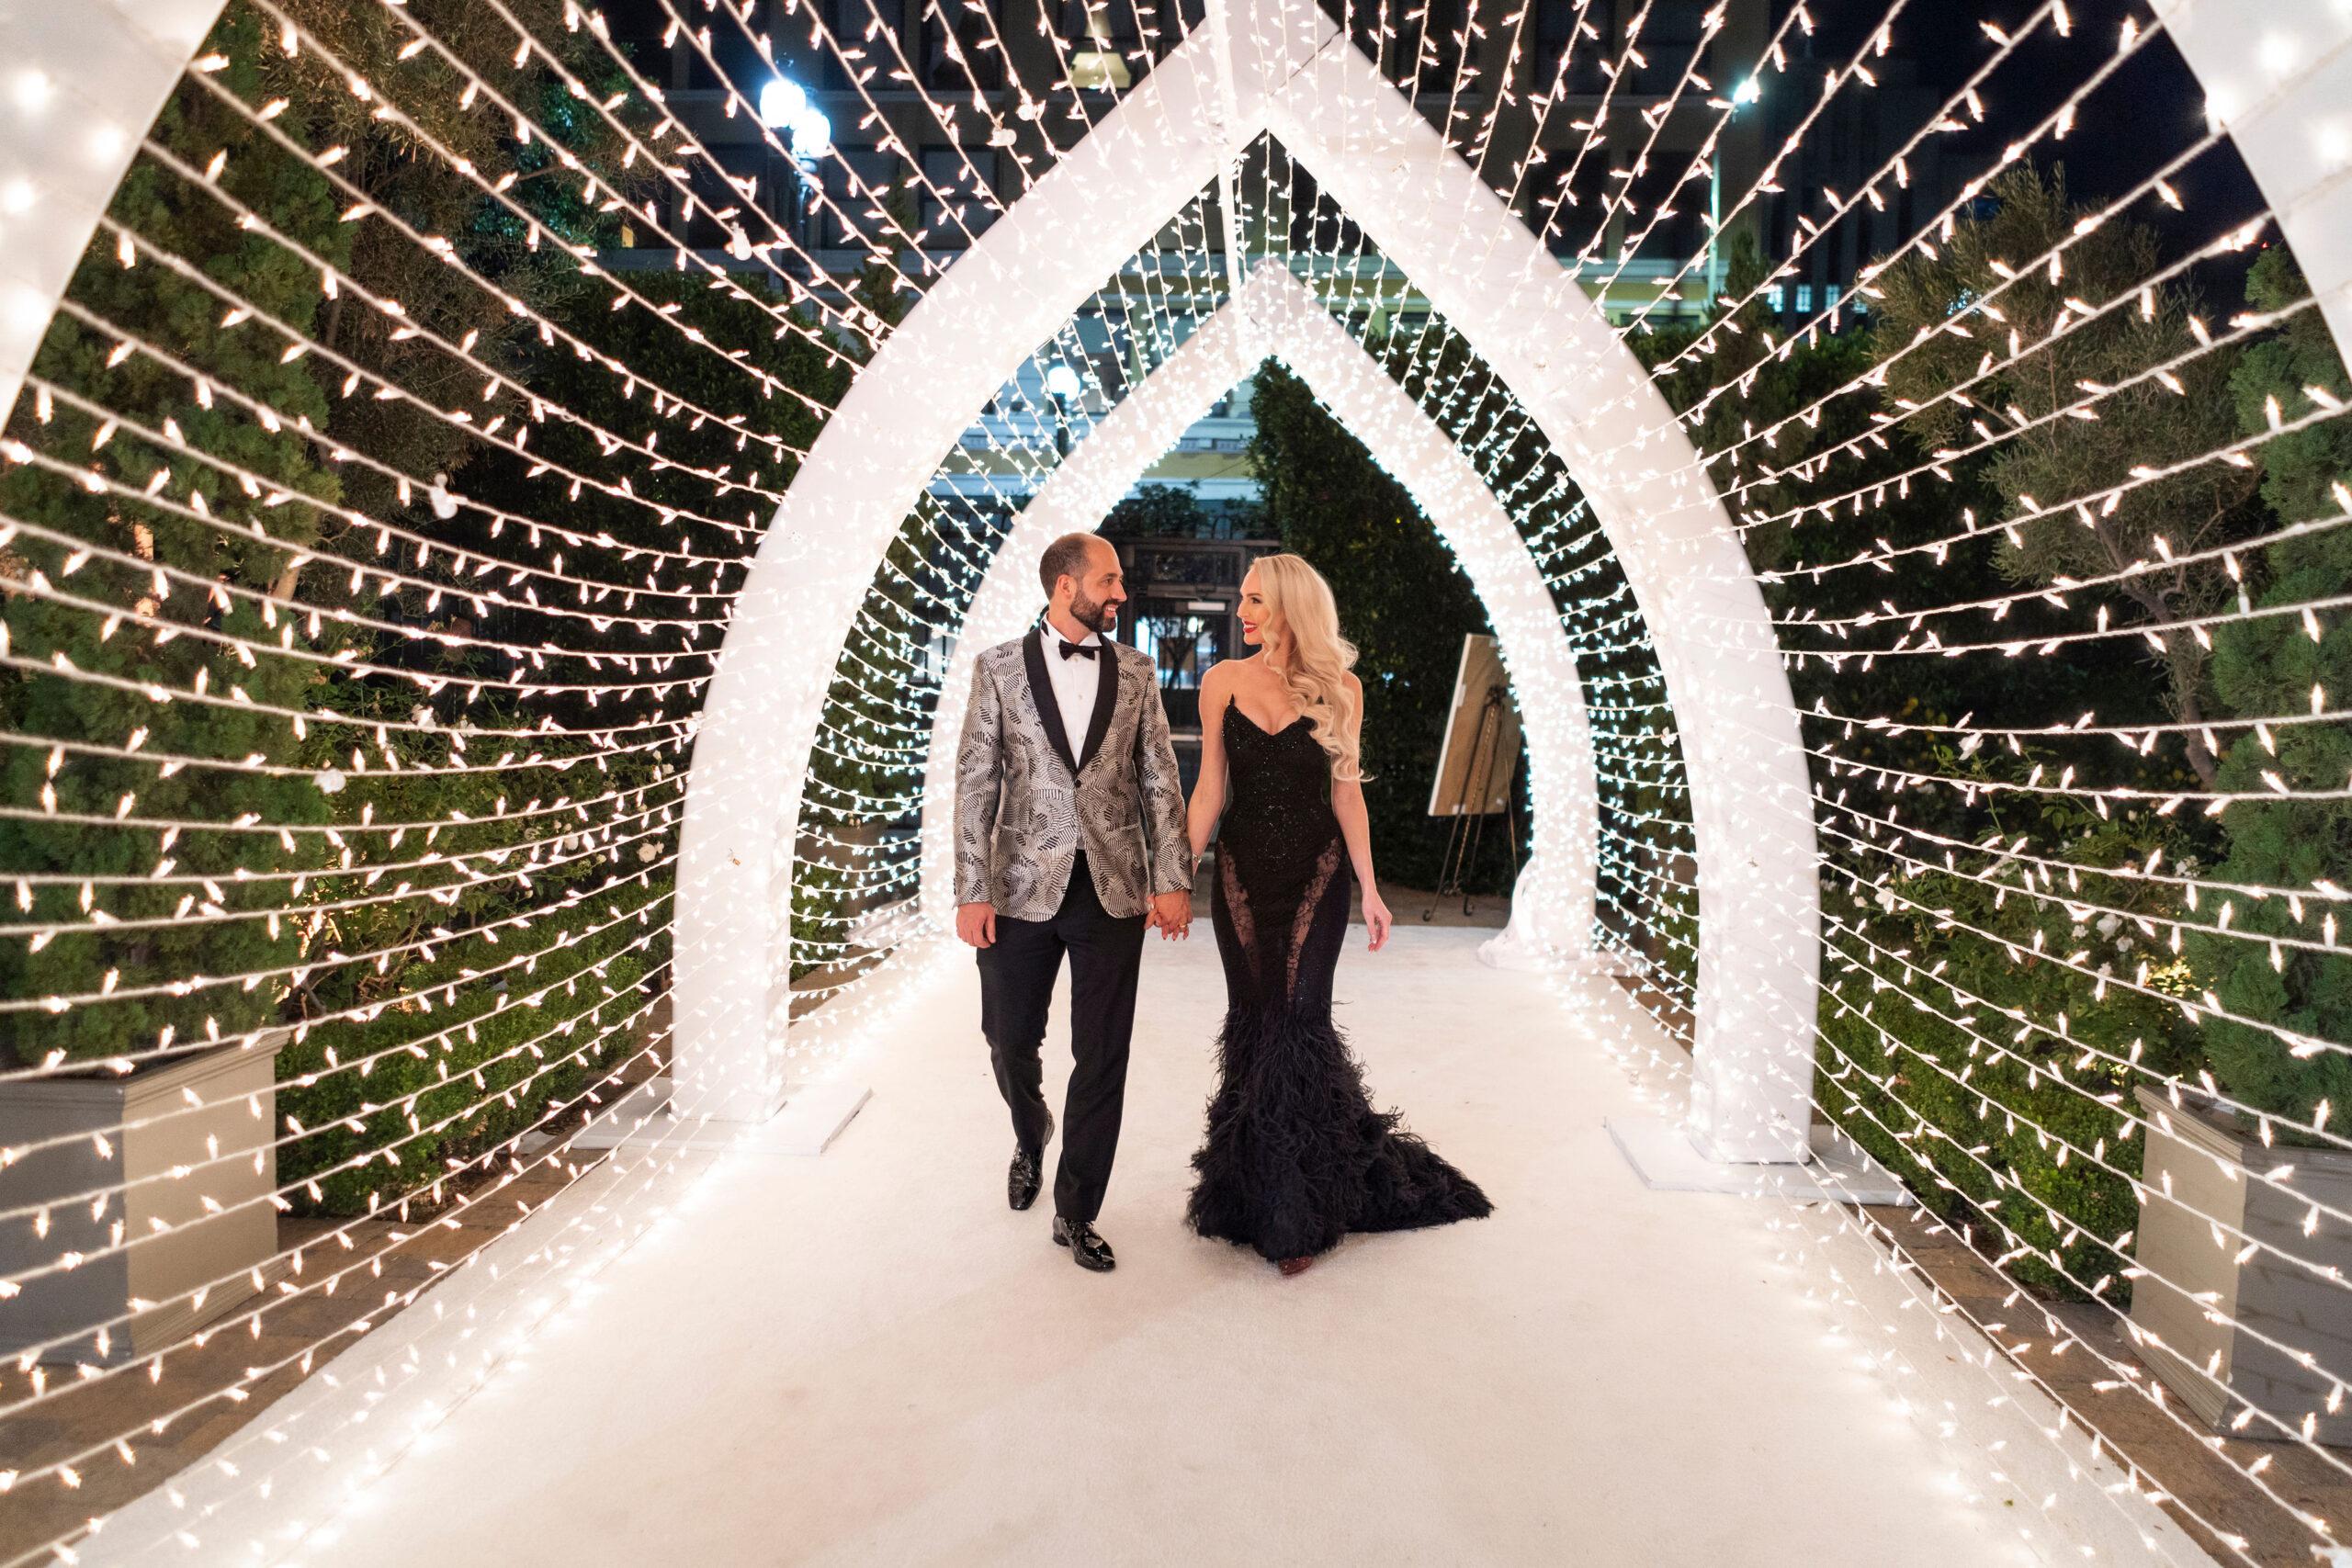 Christine Quinn and Christian Richard's winter wonderland wedding, complete with live swans (while bride wore black gown and battled coronavirus)